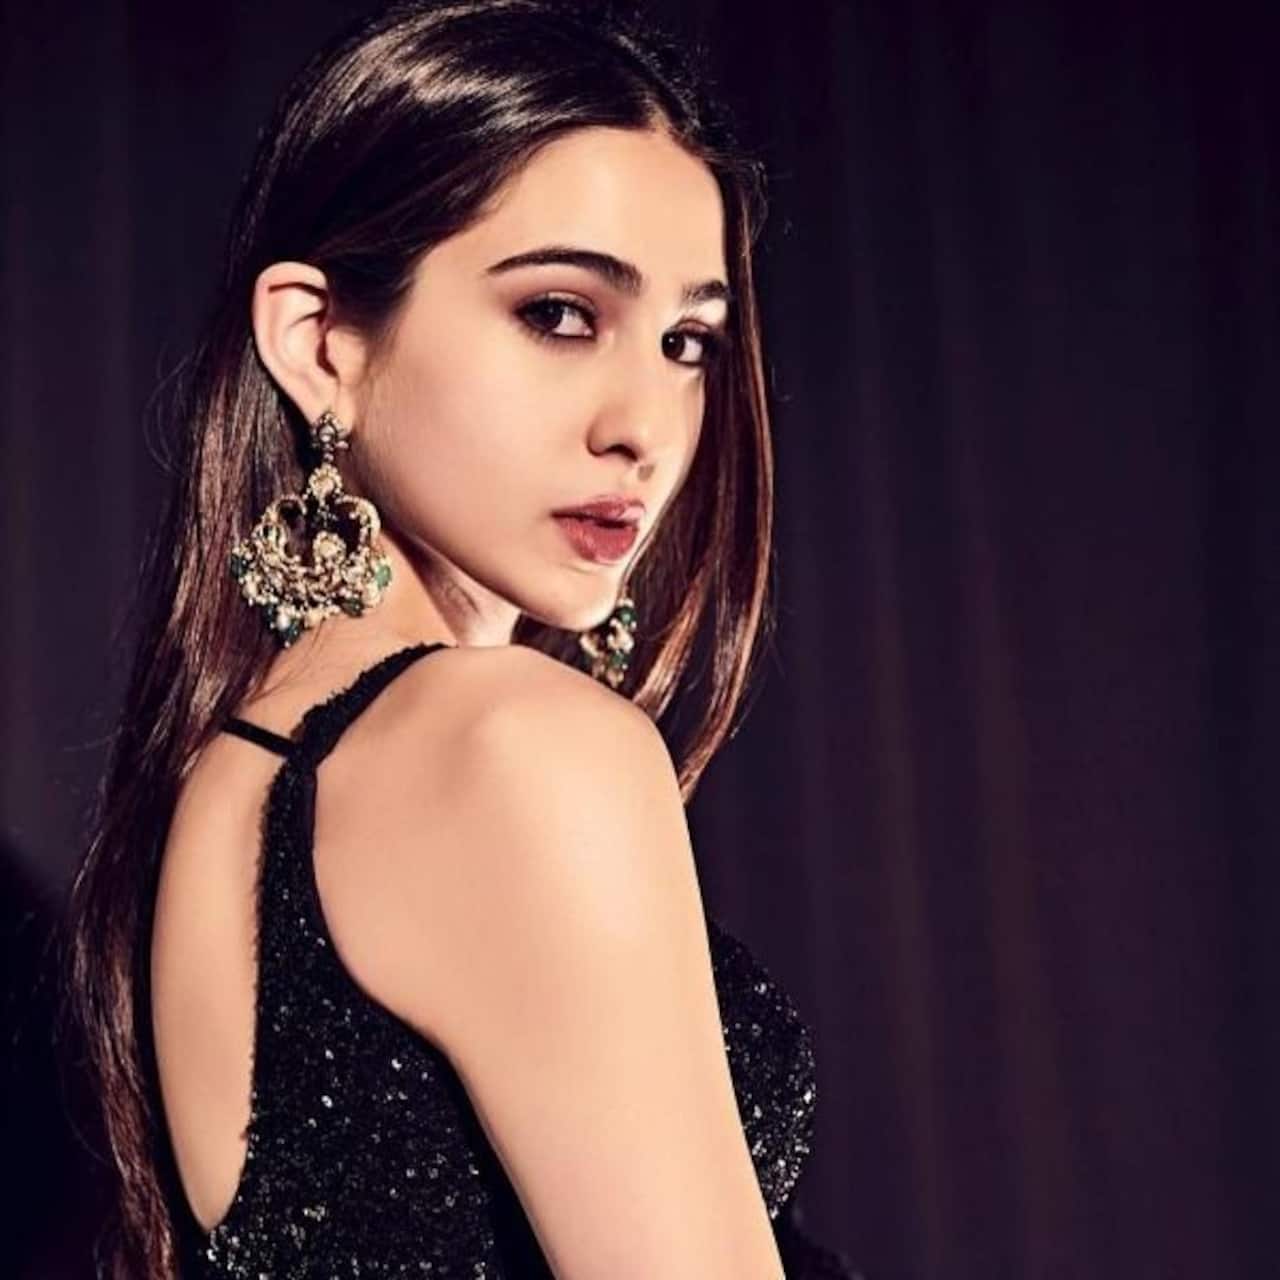 Candour, spunk and other things that set Sara Ali Khan apart from all the other star kids in Bollywood